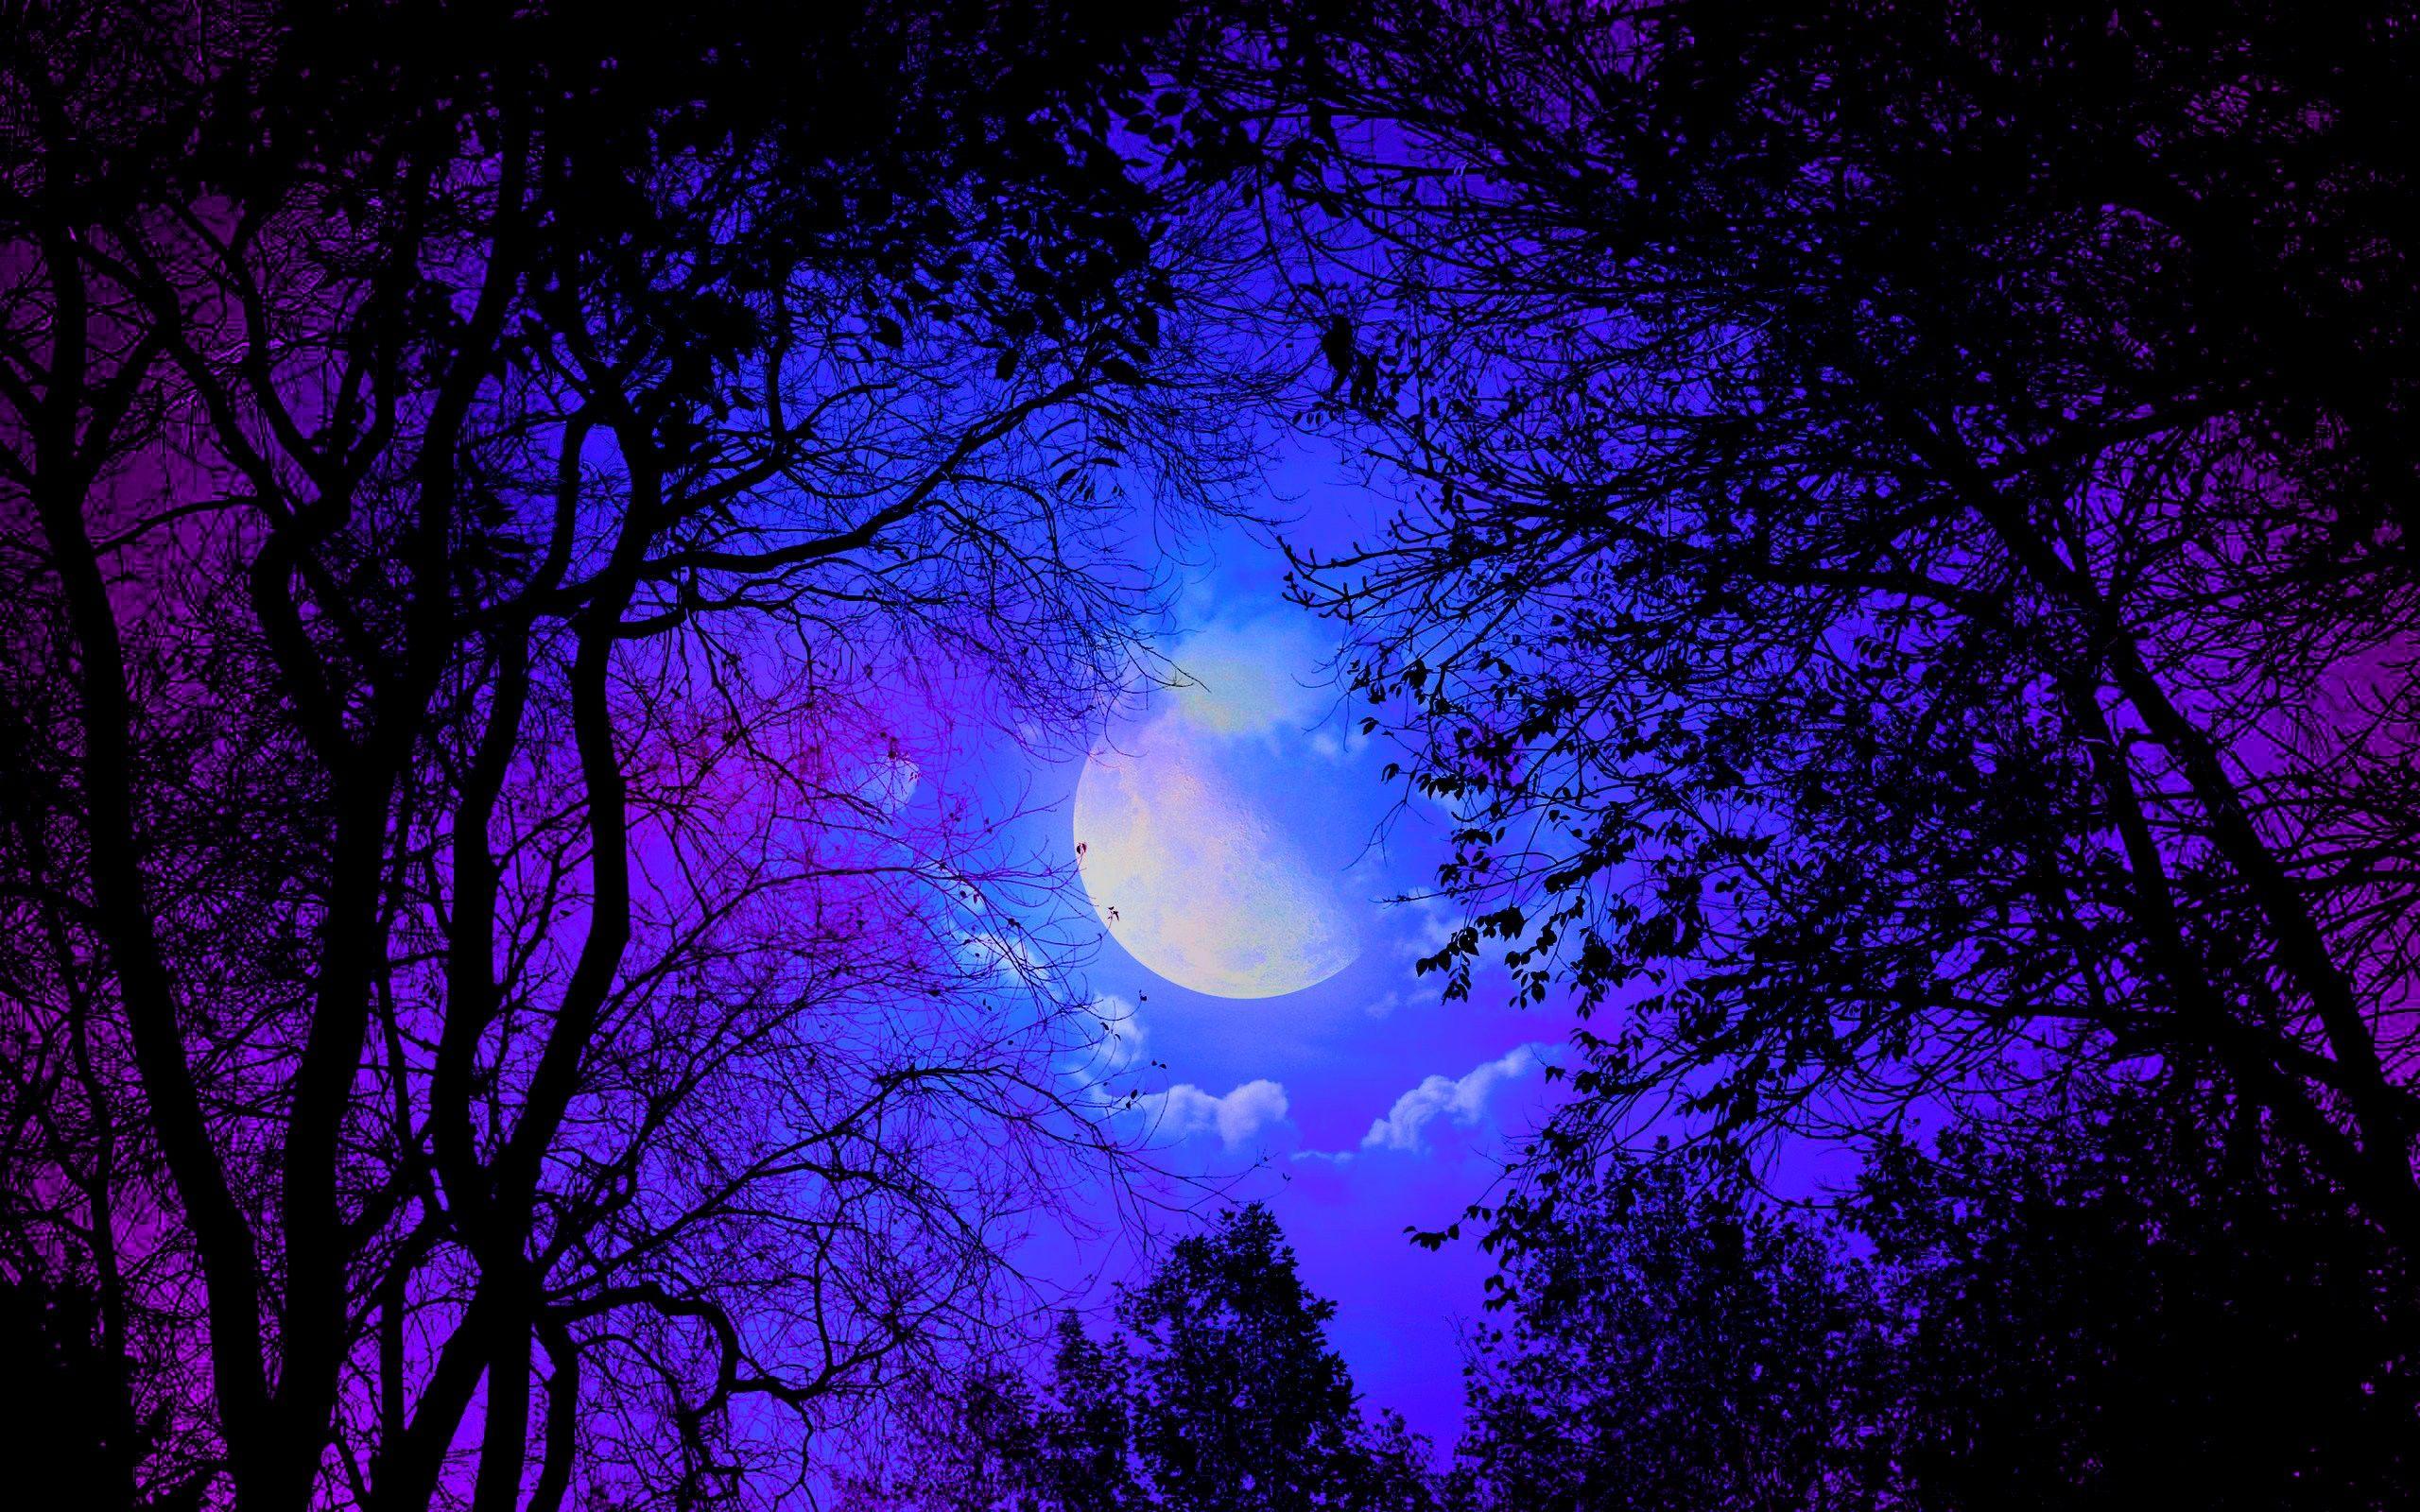 Blue hair in the moonlit forest - wide 4